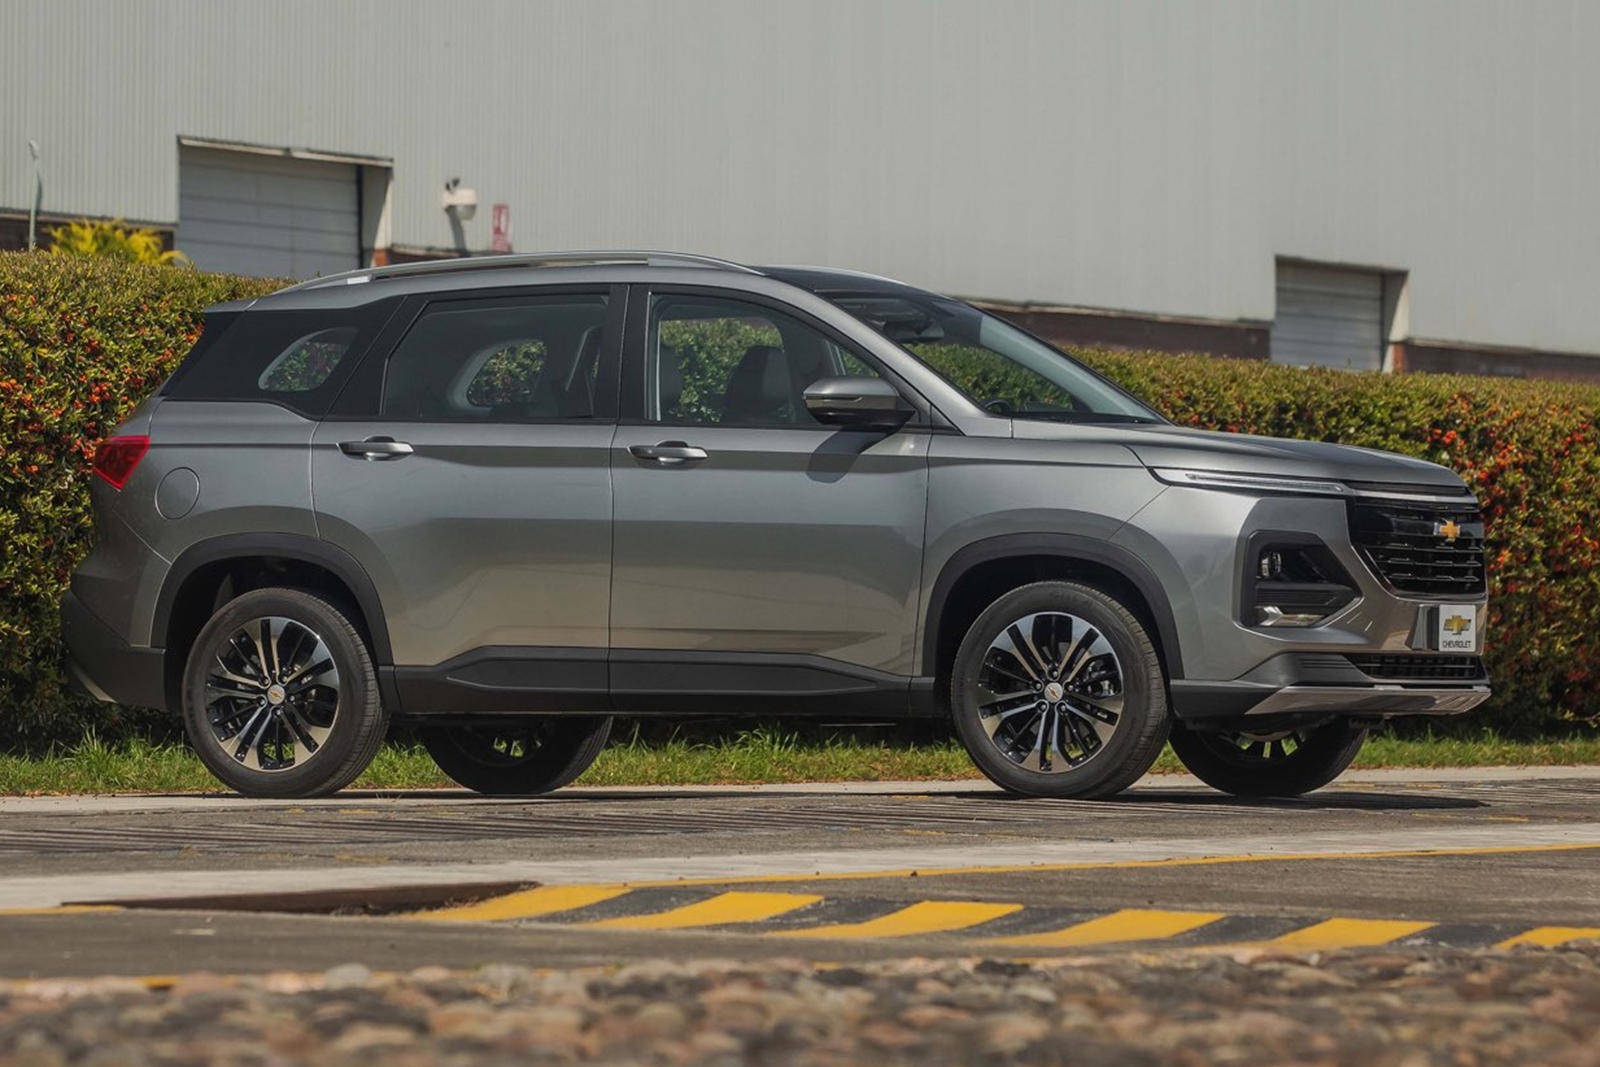 2022 Chevrolet Captiva Is A Chinese Car In An American